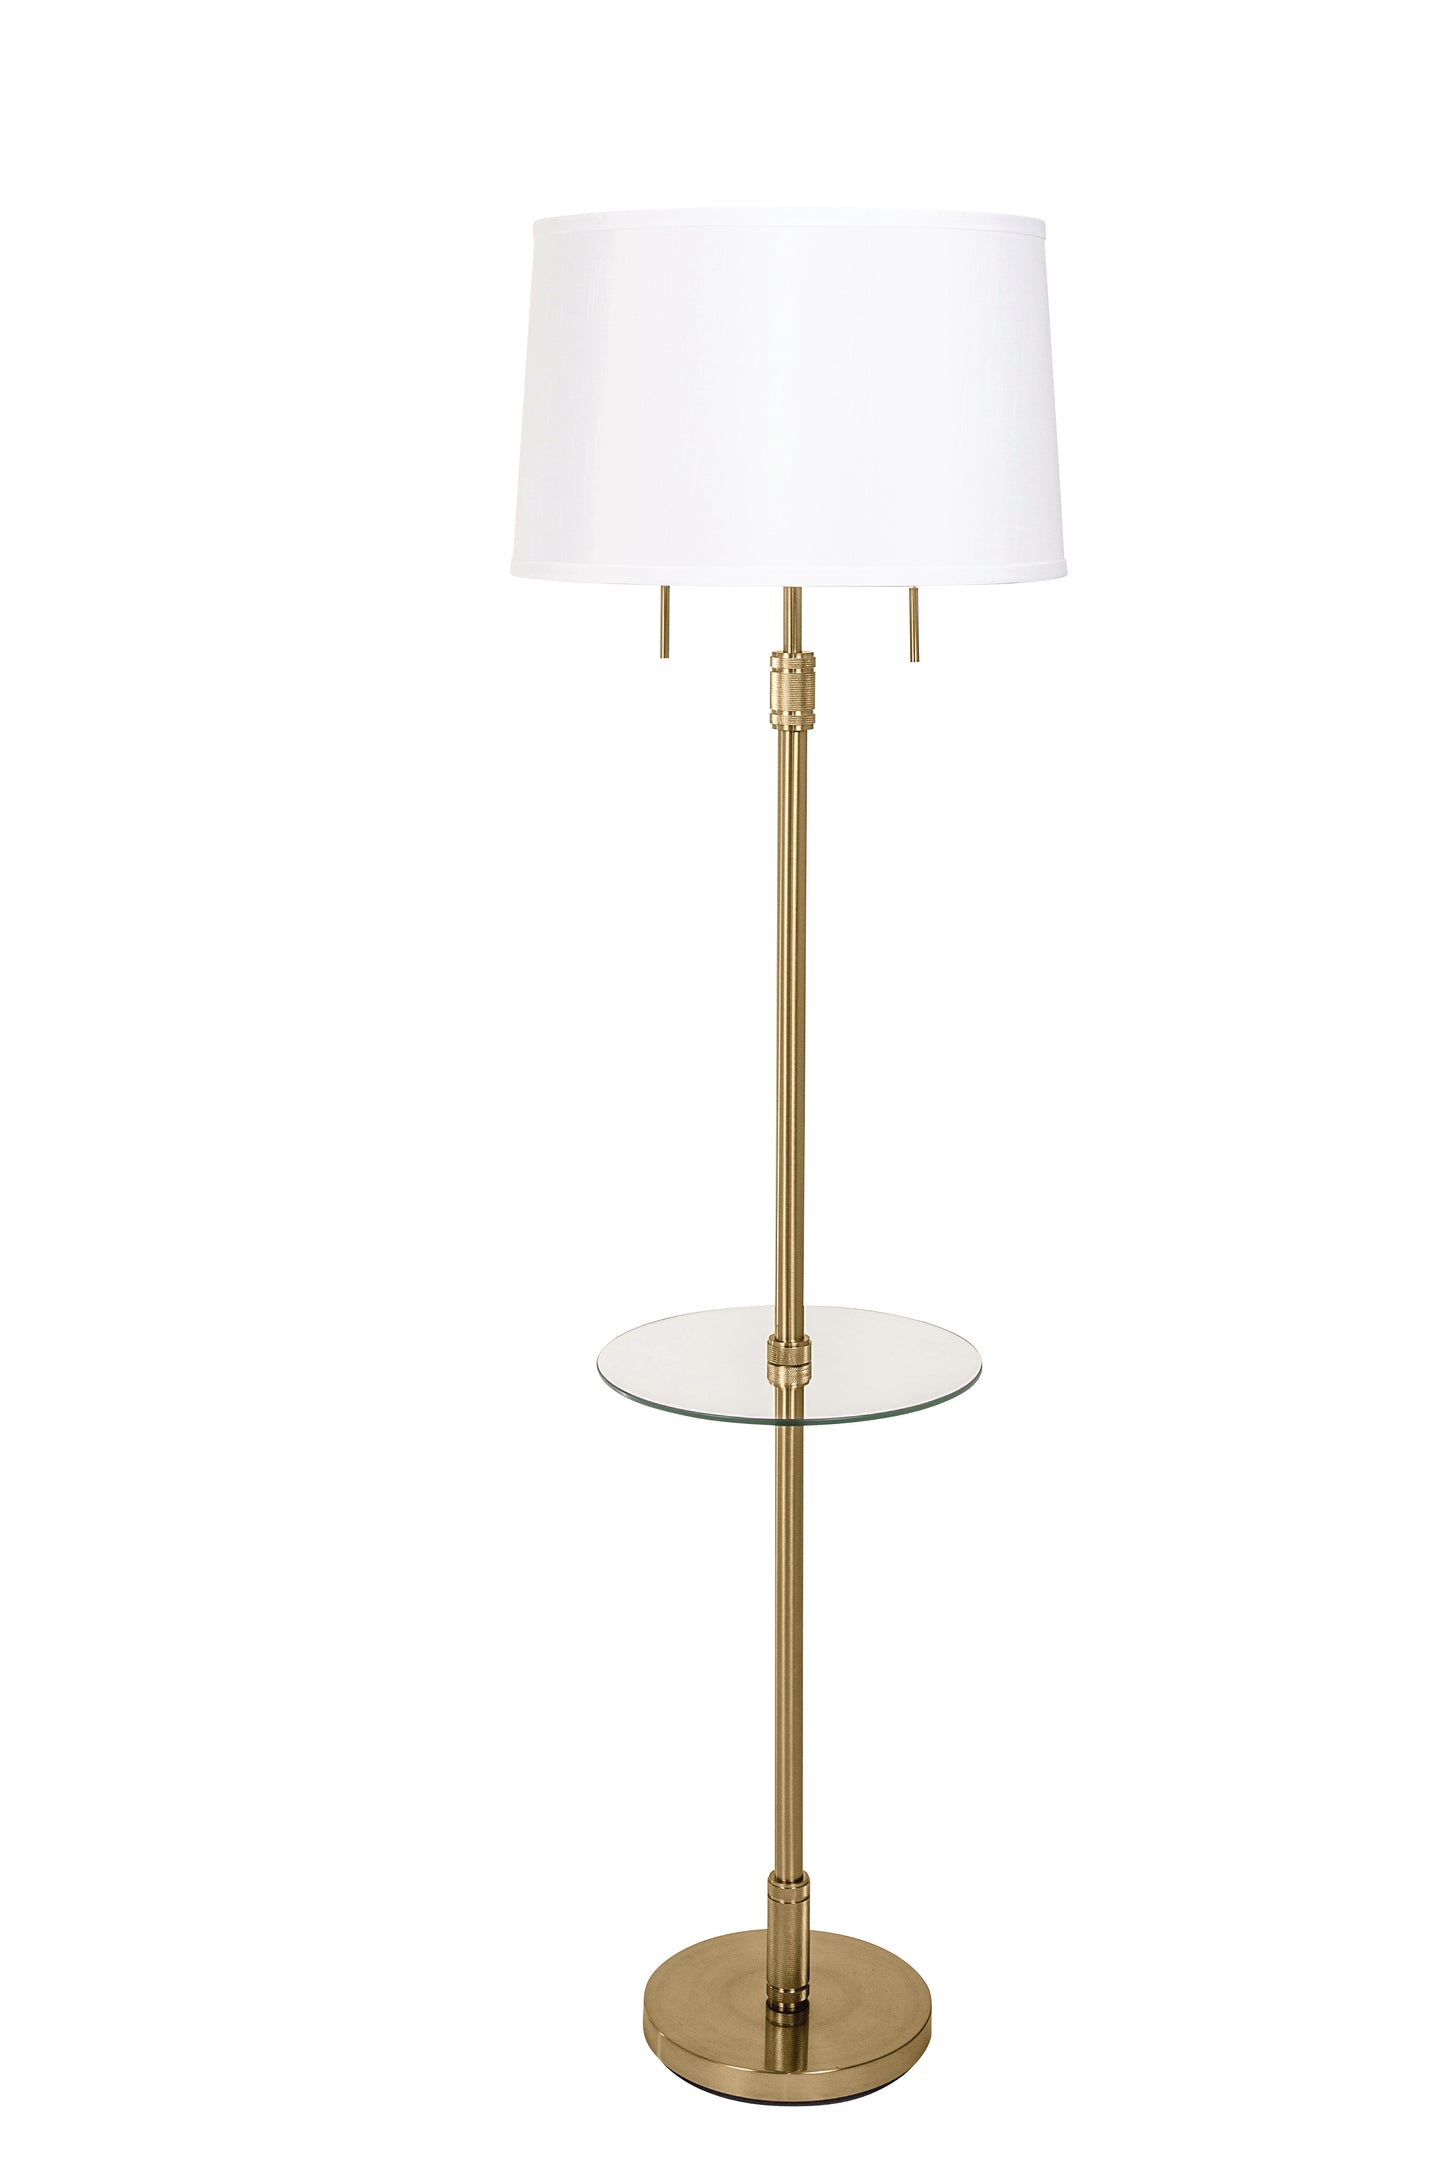 House of Troy Killington Brushed Brass Floor lamp with glass table and hardback shade KL302-BB